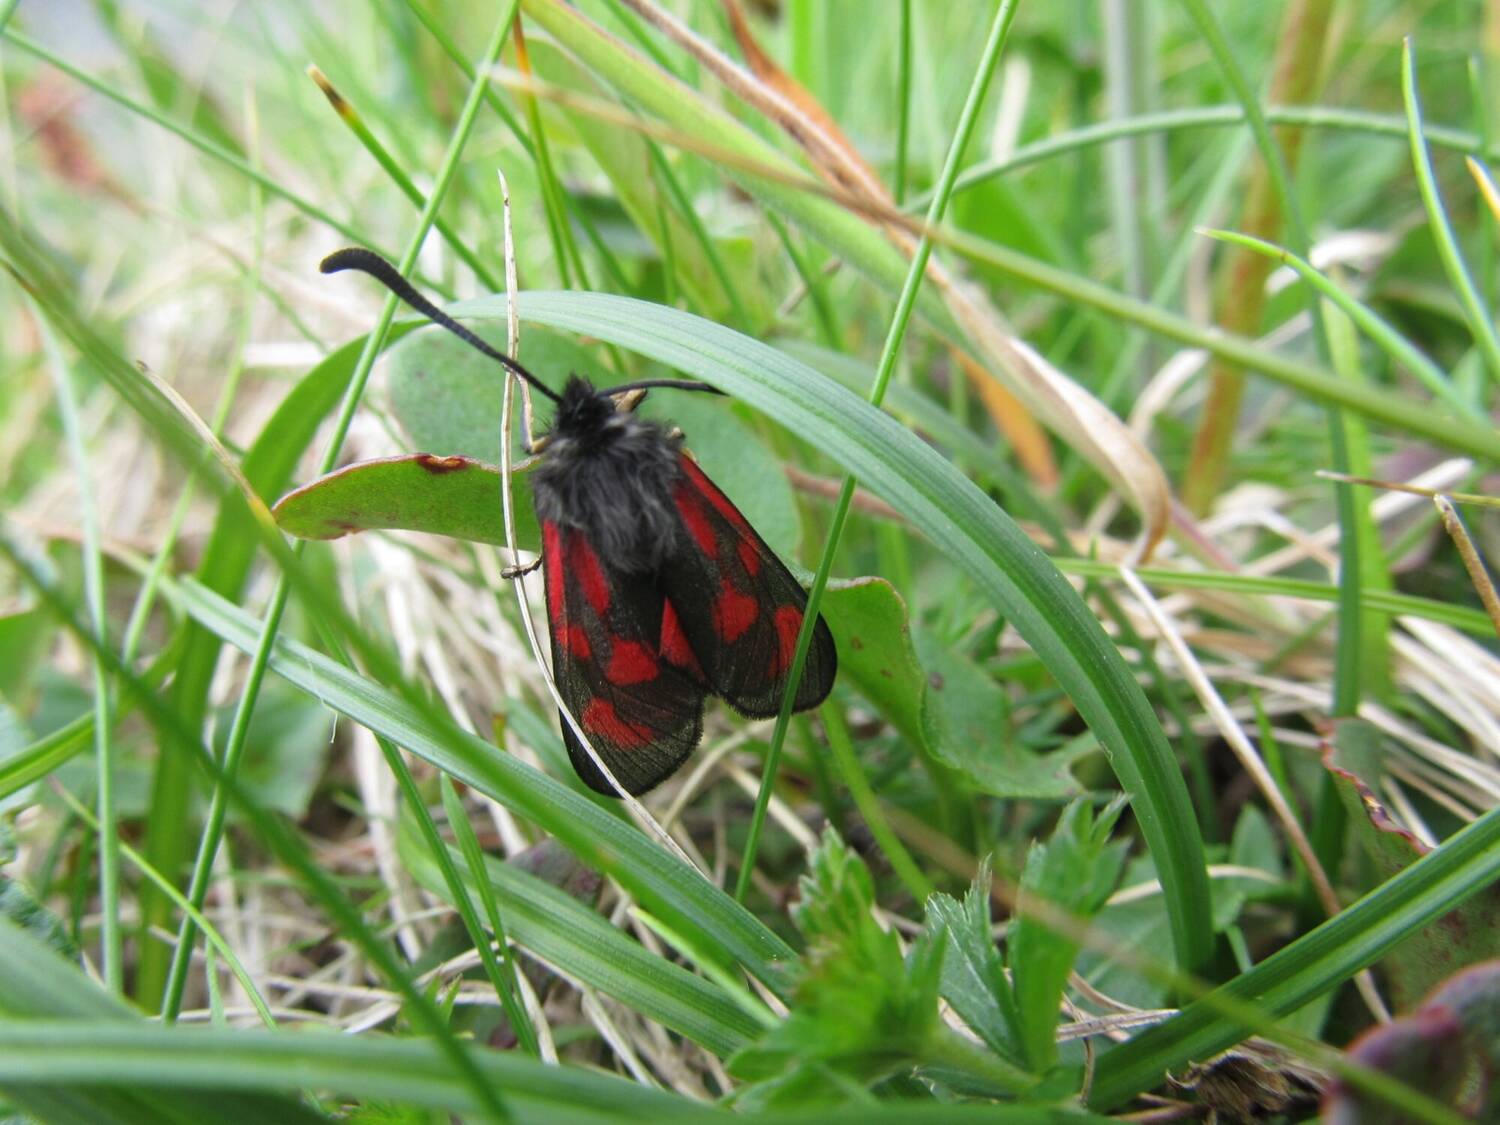 A moth, with black and red colouring, is among long grass.